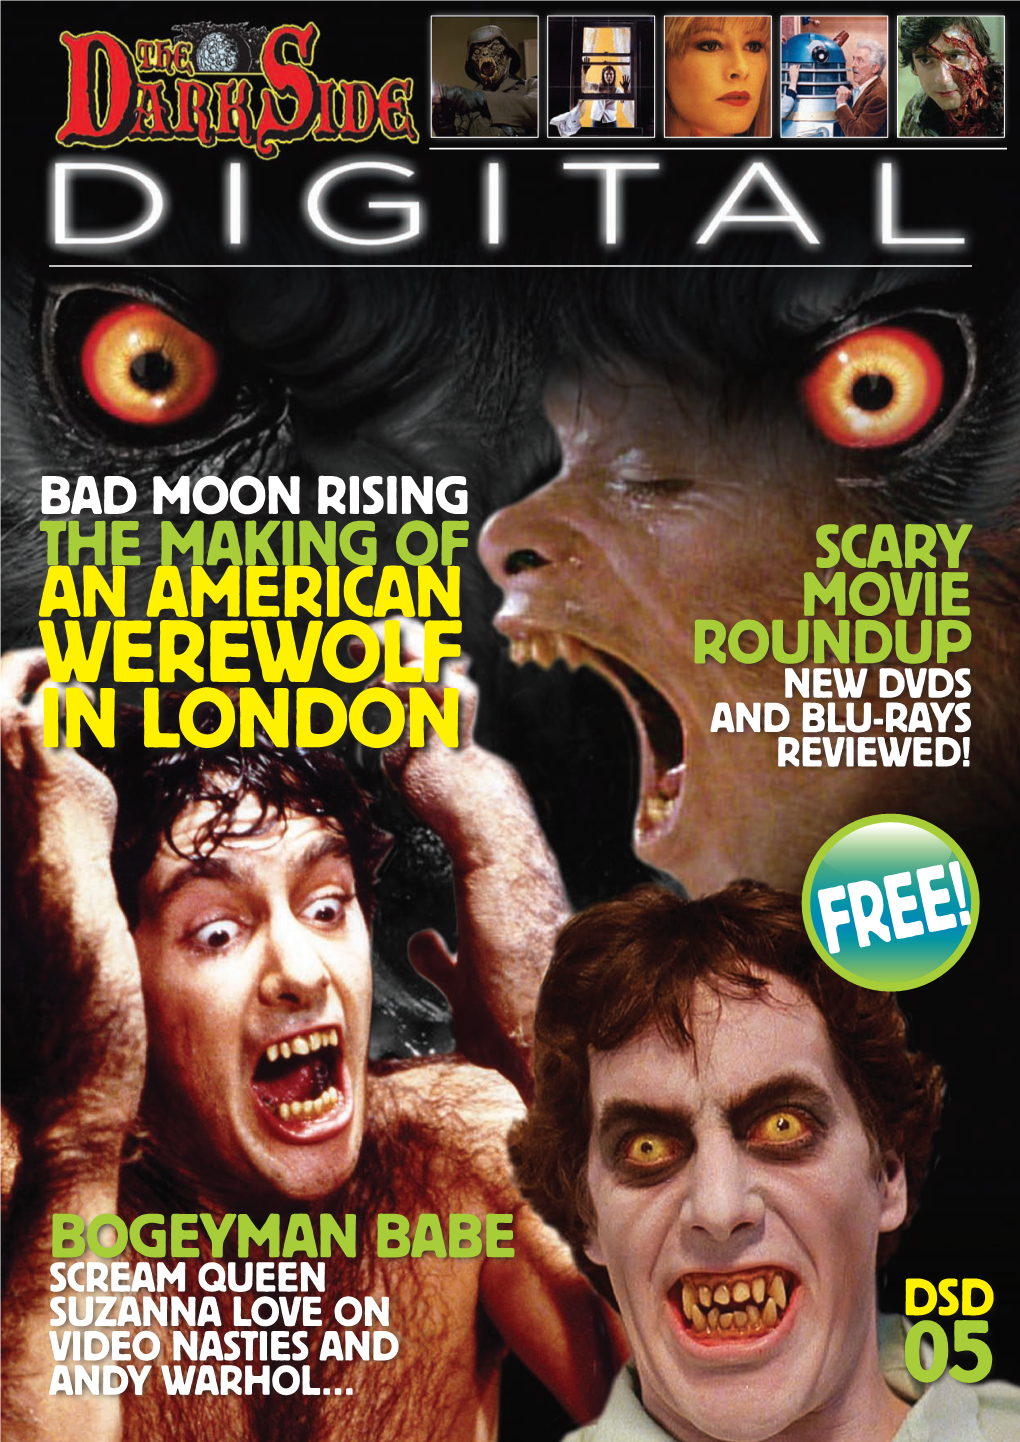 Werewolf New Dvds and Blu-Rays in London Reviewed!